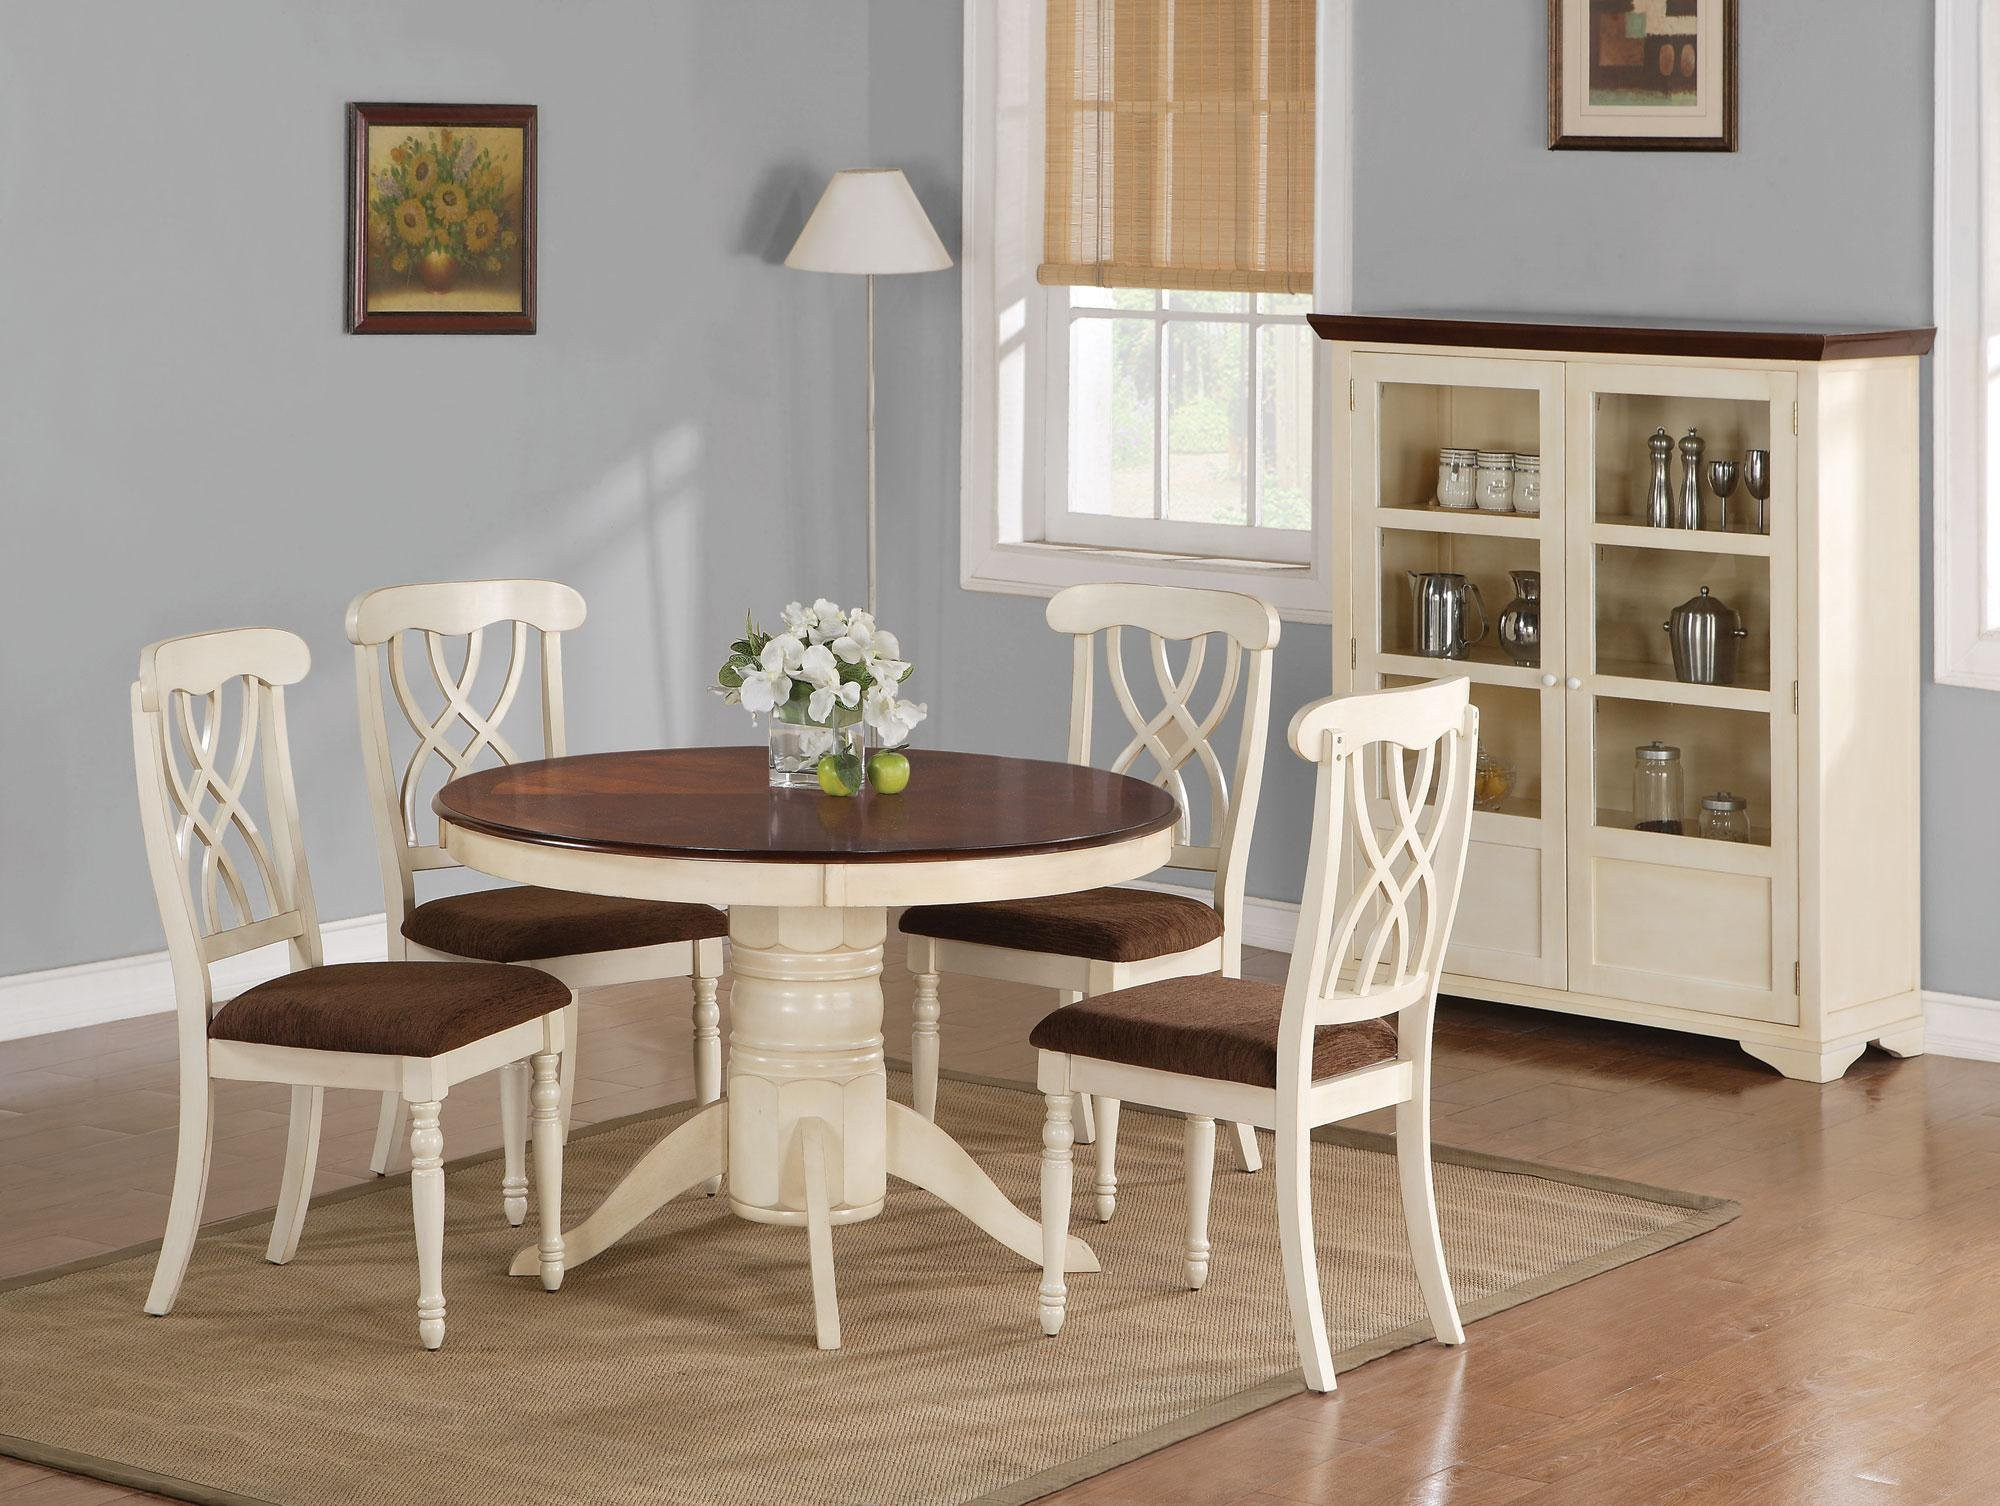 White Kitchen Table Set New Beautiful White Round Kitchen Table and Chairs